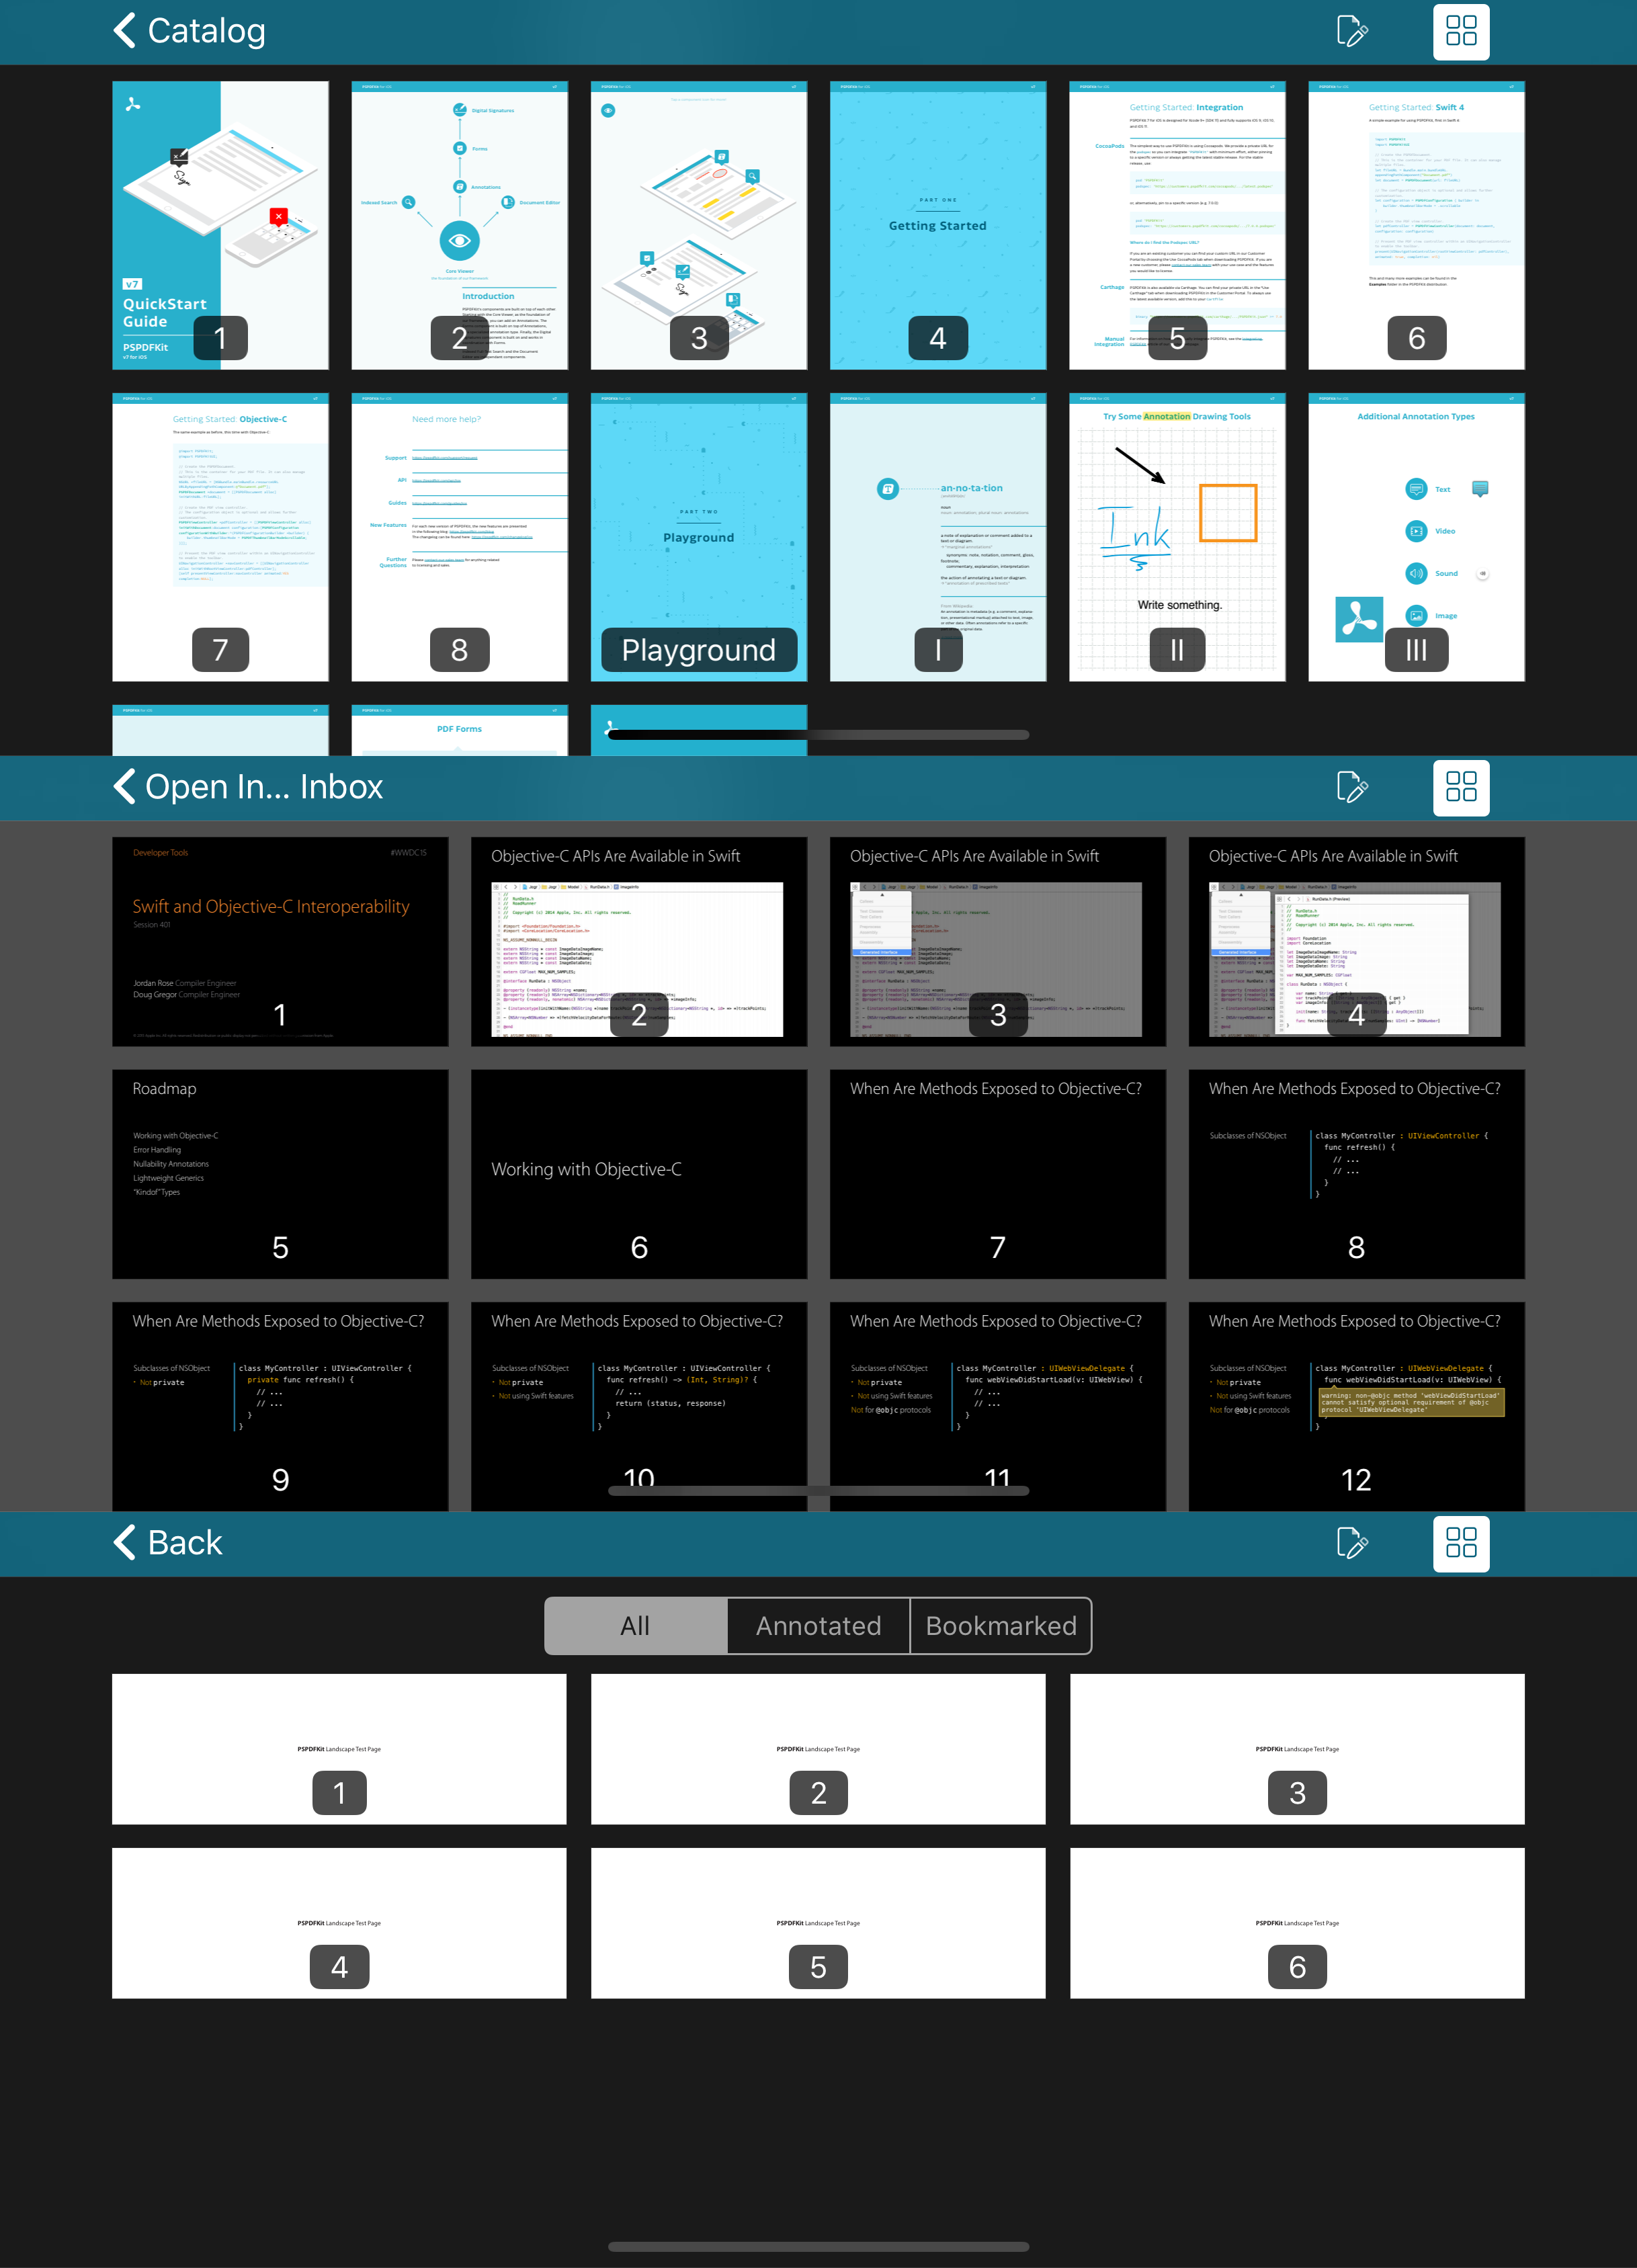 Thumbnails from three documents with different pages sizes, all fitting well on iPhone in landscape